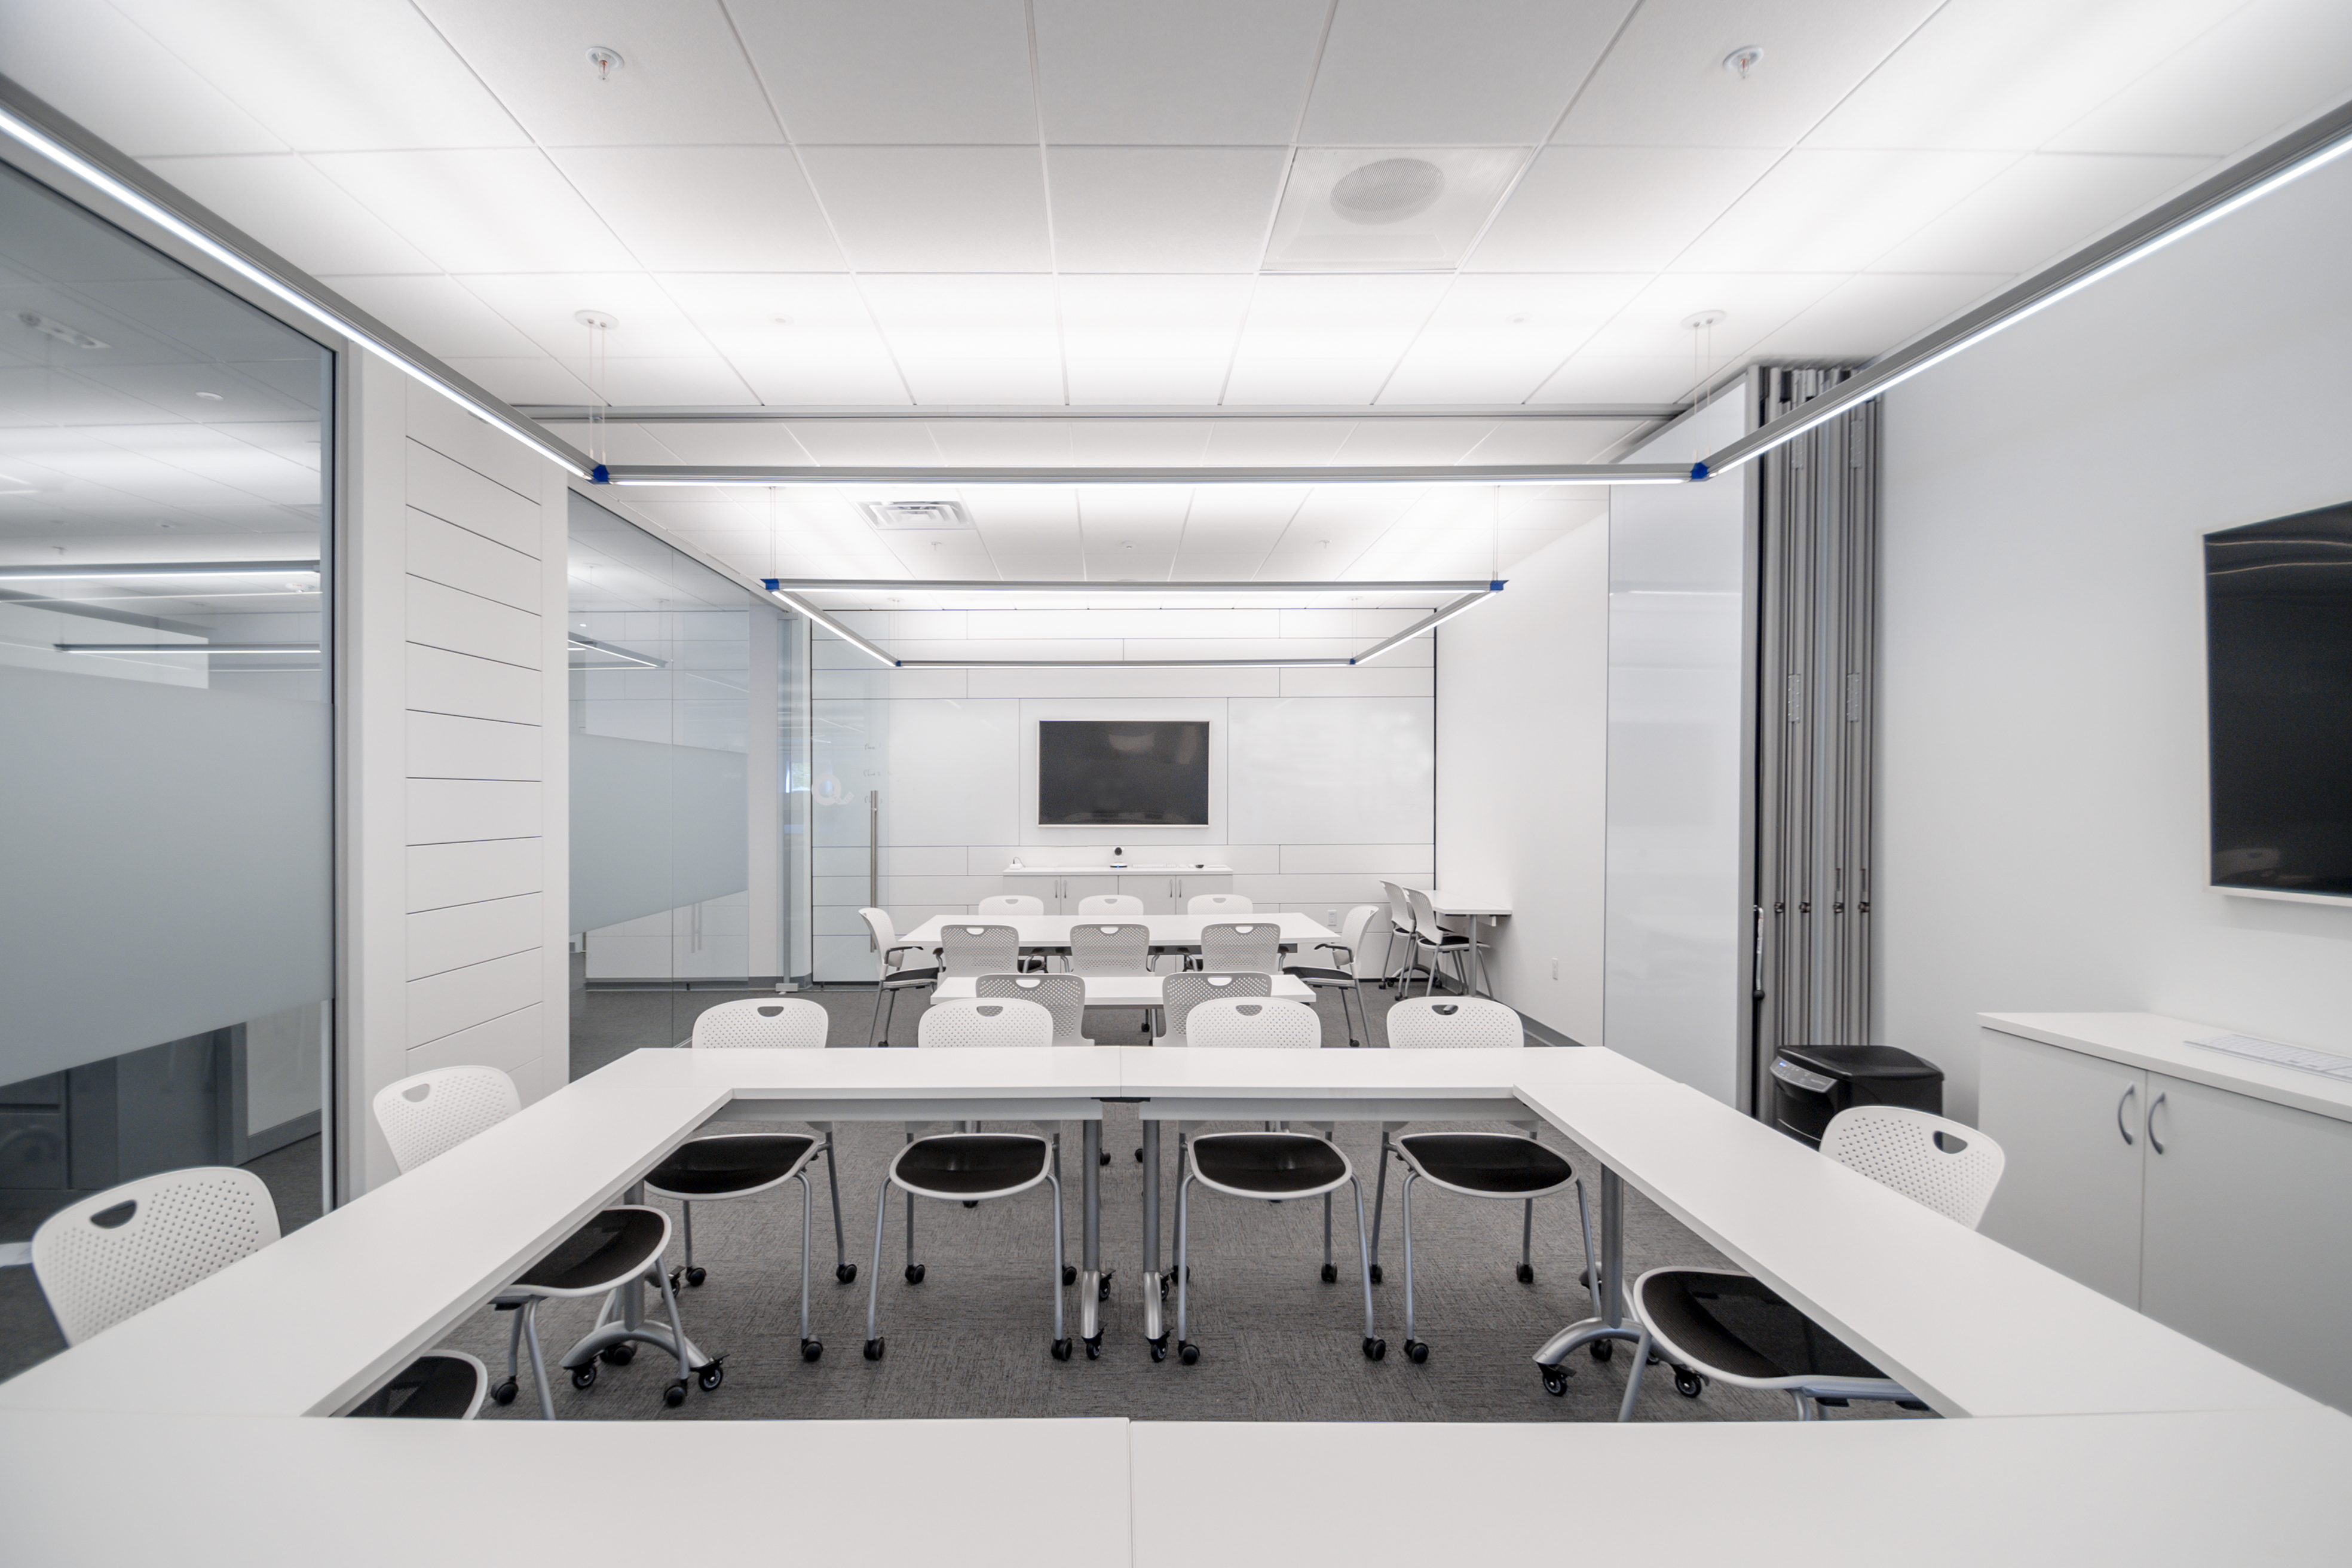 Office and Commercial Lighting - Q-Tran